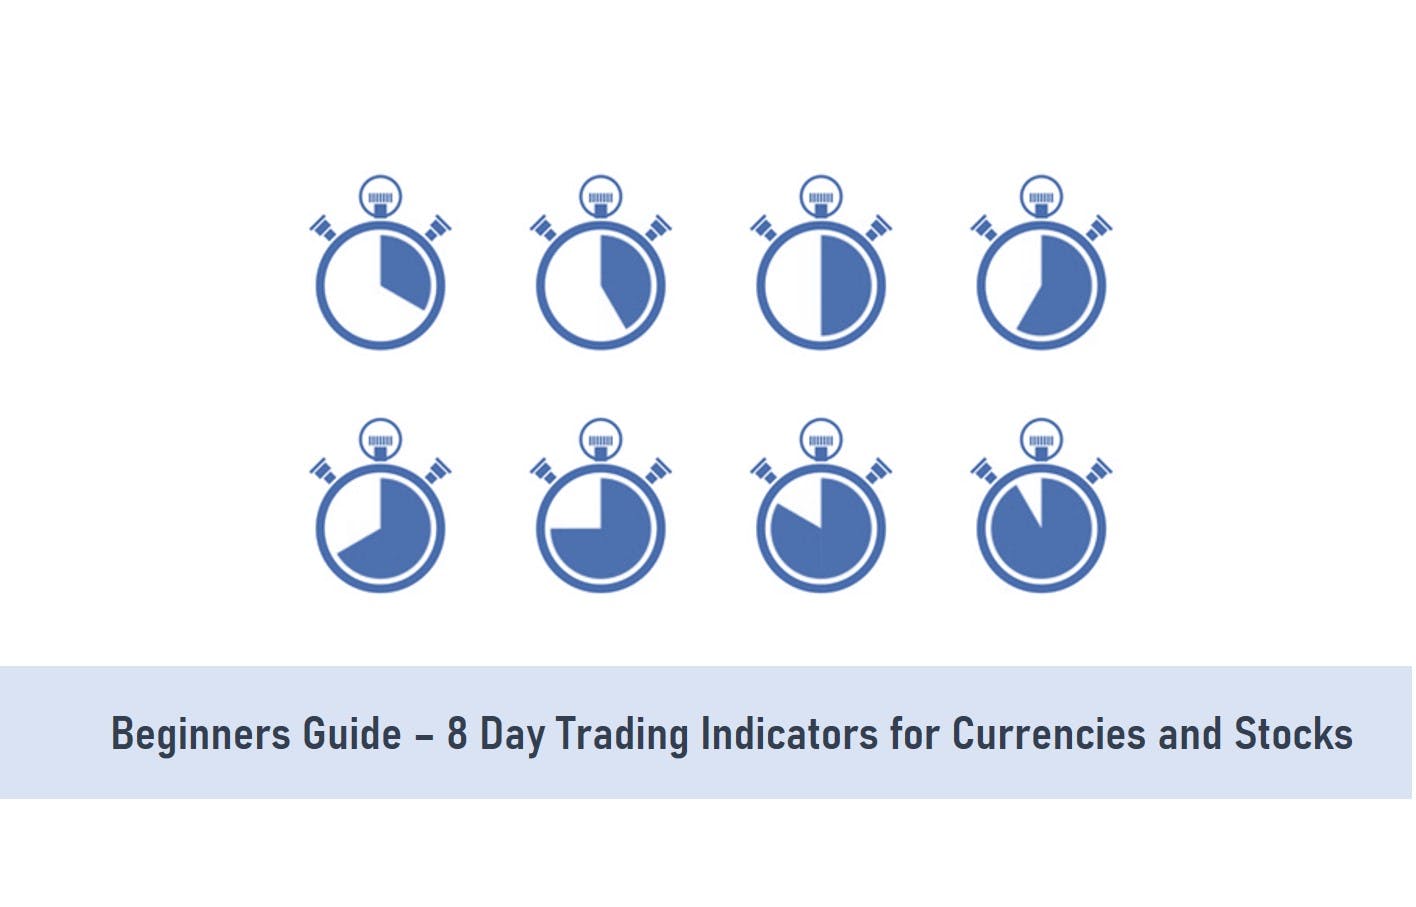 Beginners Guide – 8 Day Trading Indicators for Currencies and Stocks